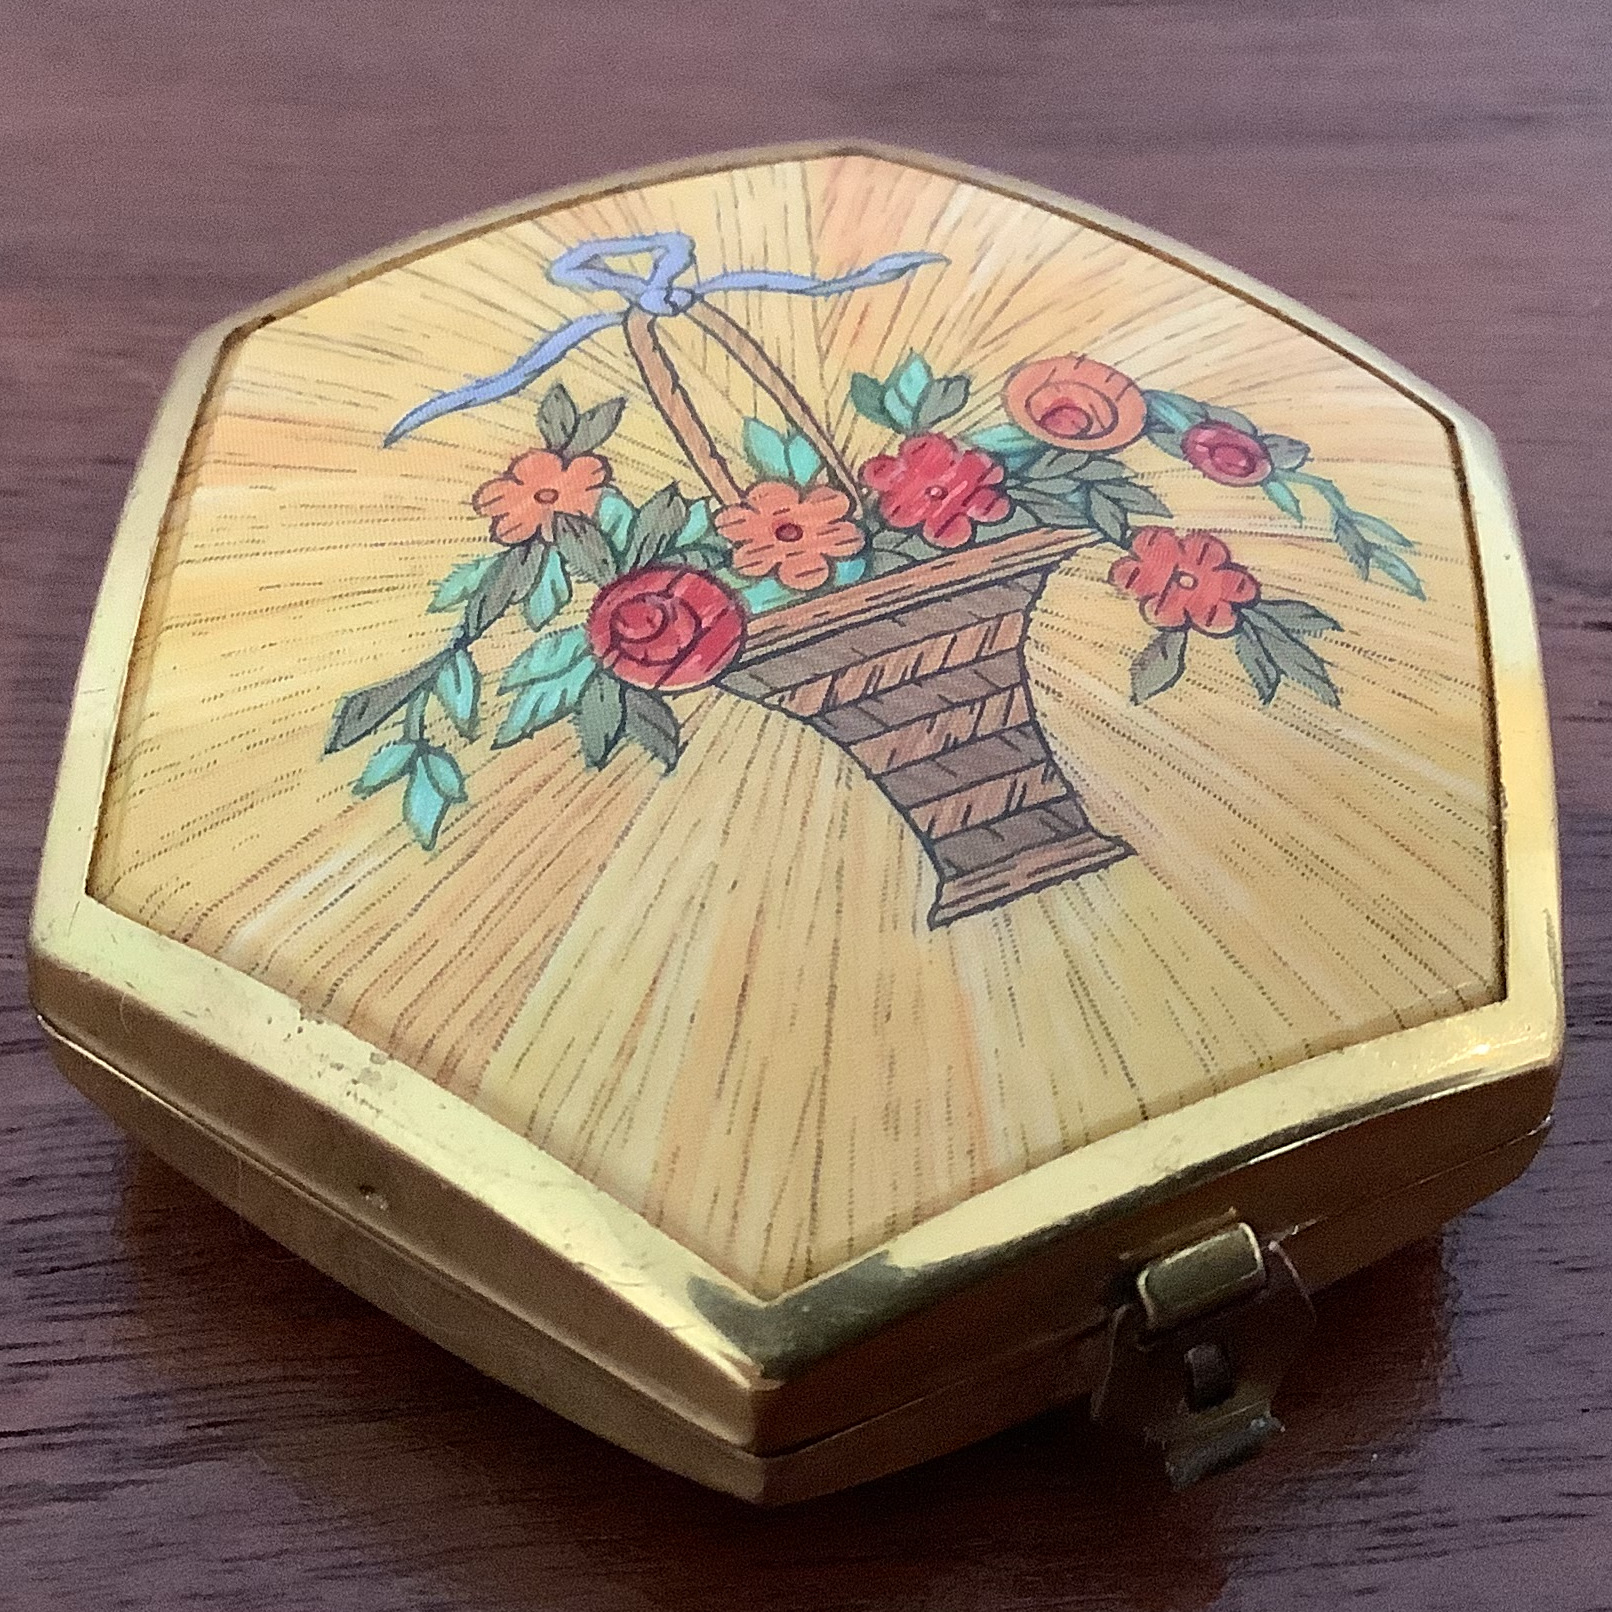 Closed compact with gold toned edges and a basket of flowers painted on the cover